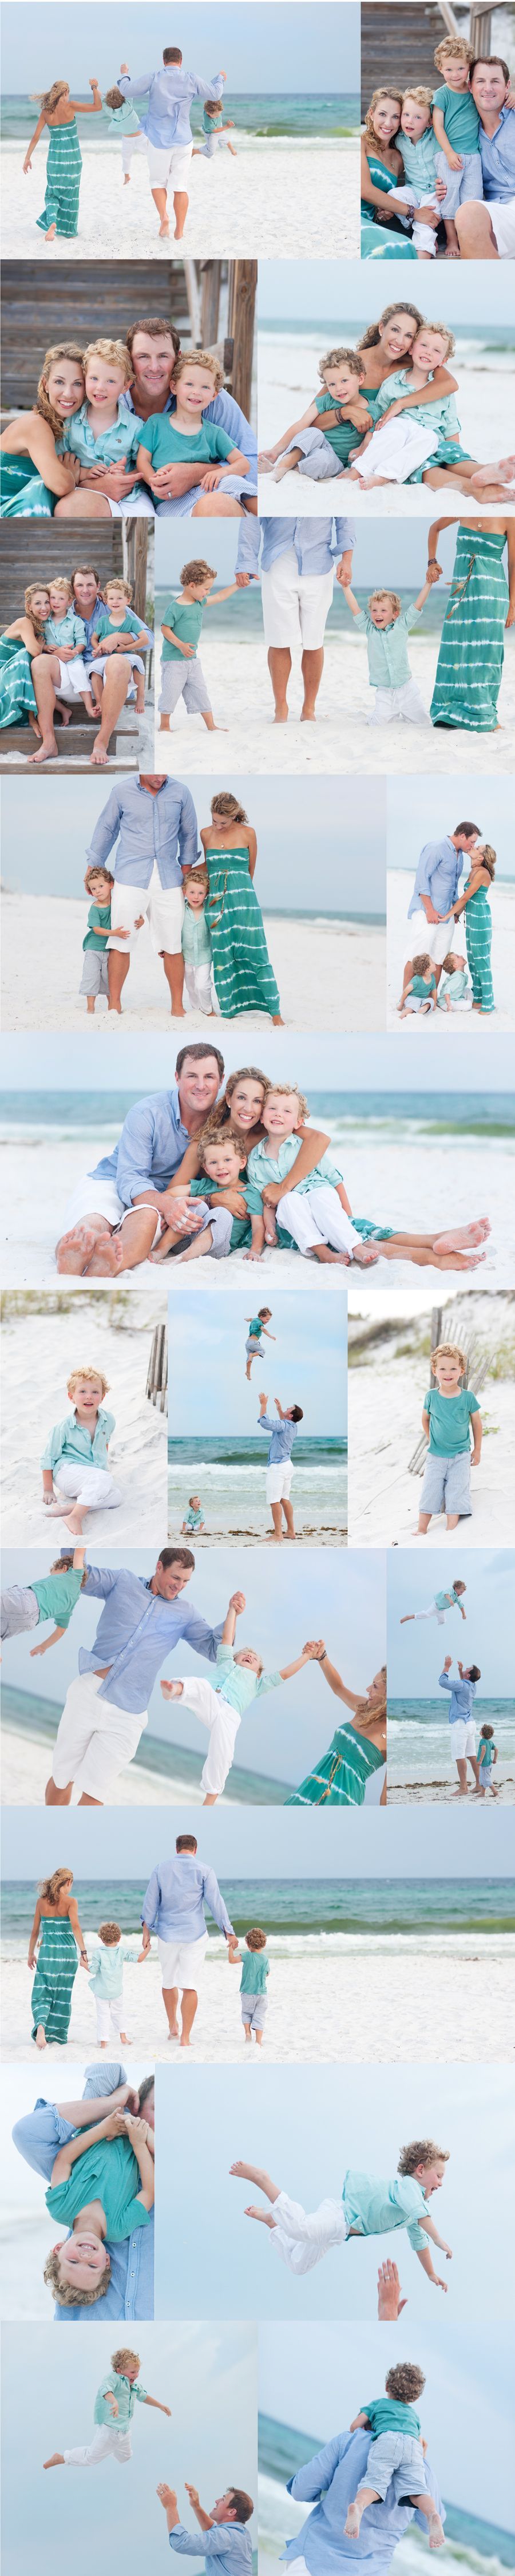 Beautiful Family Beach Poses family portrait  love the outfit colors!